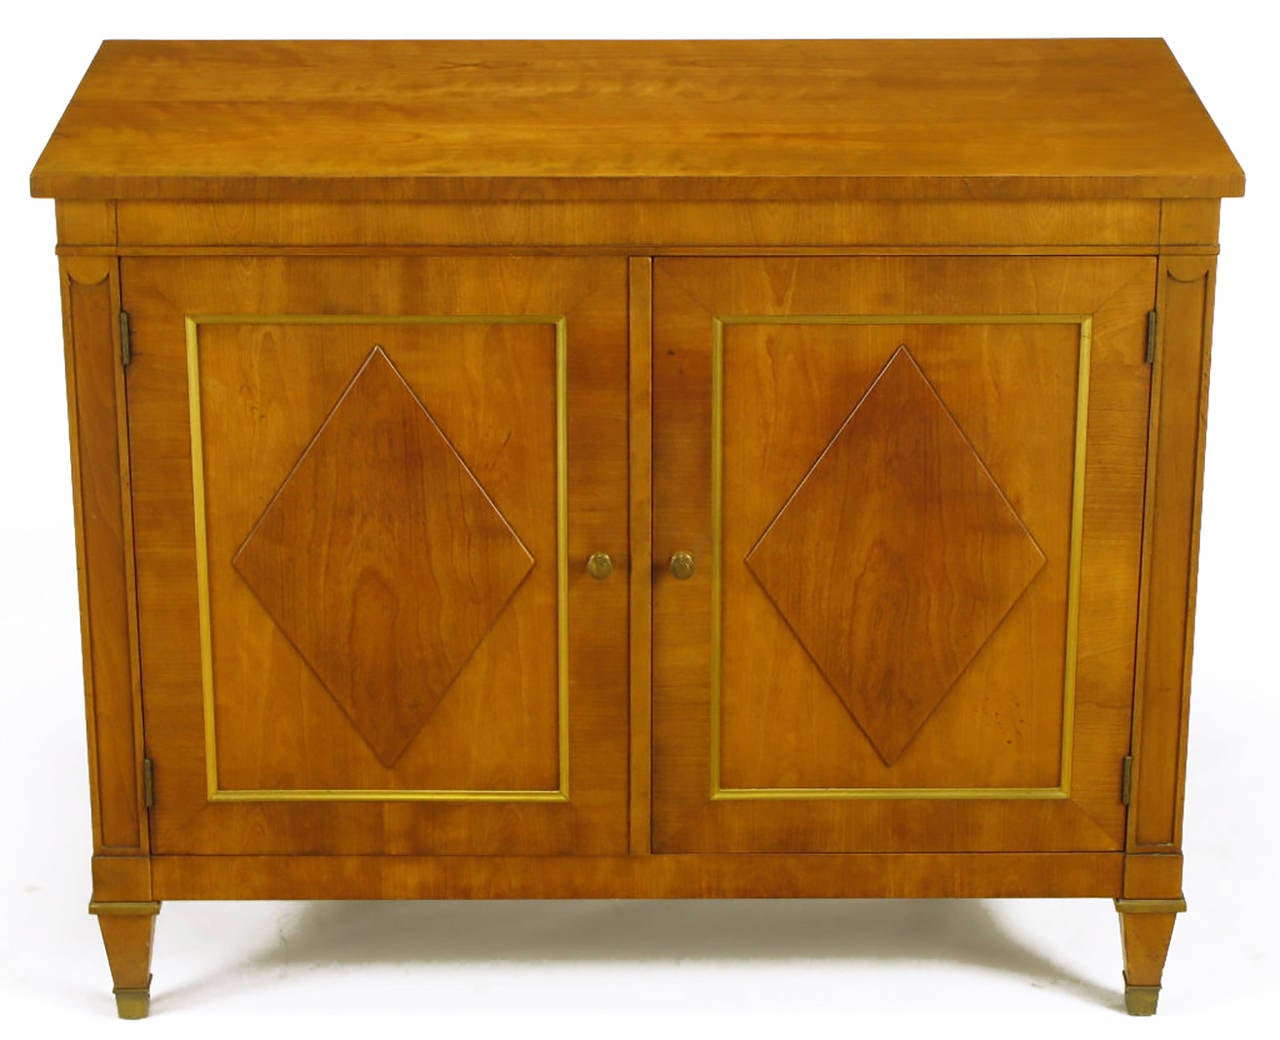 Kindel Furniture figured light walnut Regency two-door cabinet with diamond shaped burl door panels, and parcel gilt detailing. Brass sabots and tapered leg capitals along with brass pulls. Two doors open to reveal a pair of drawers and open lower